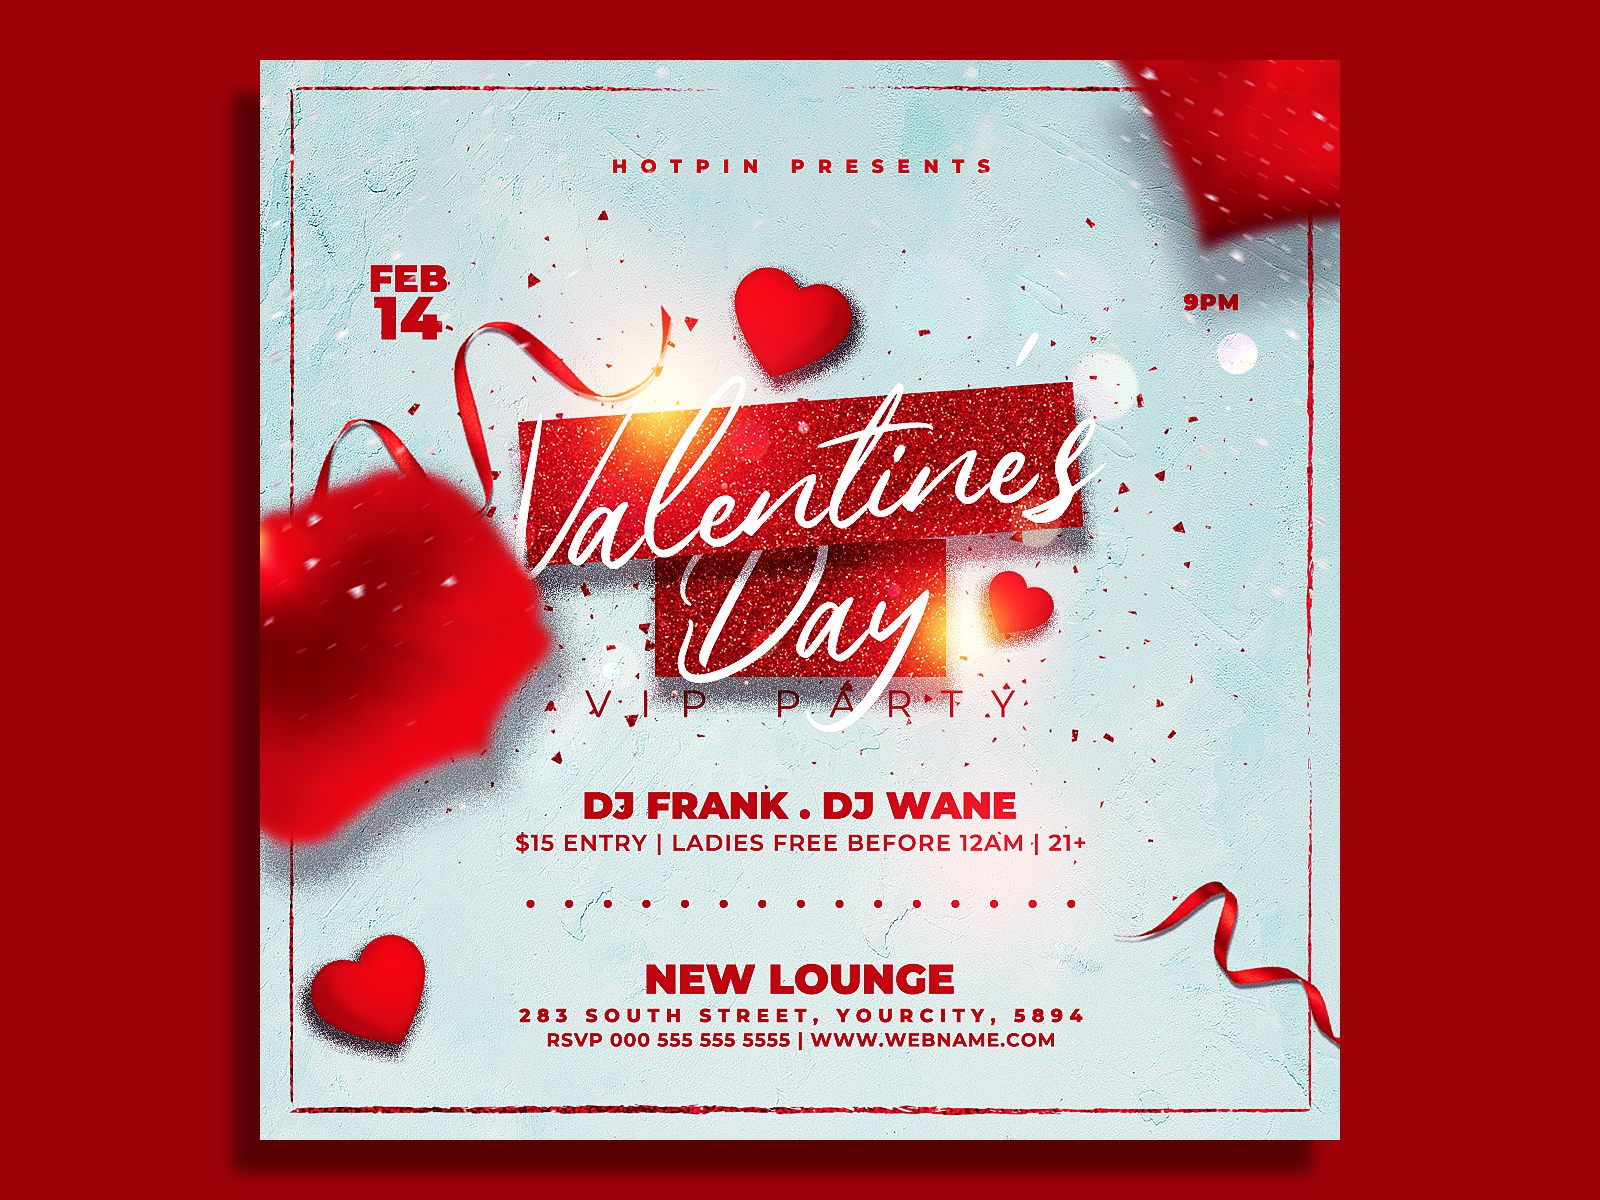 Valentines Day Flyer Template by Hotpin on Dribbble